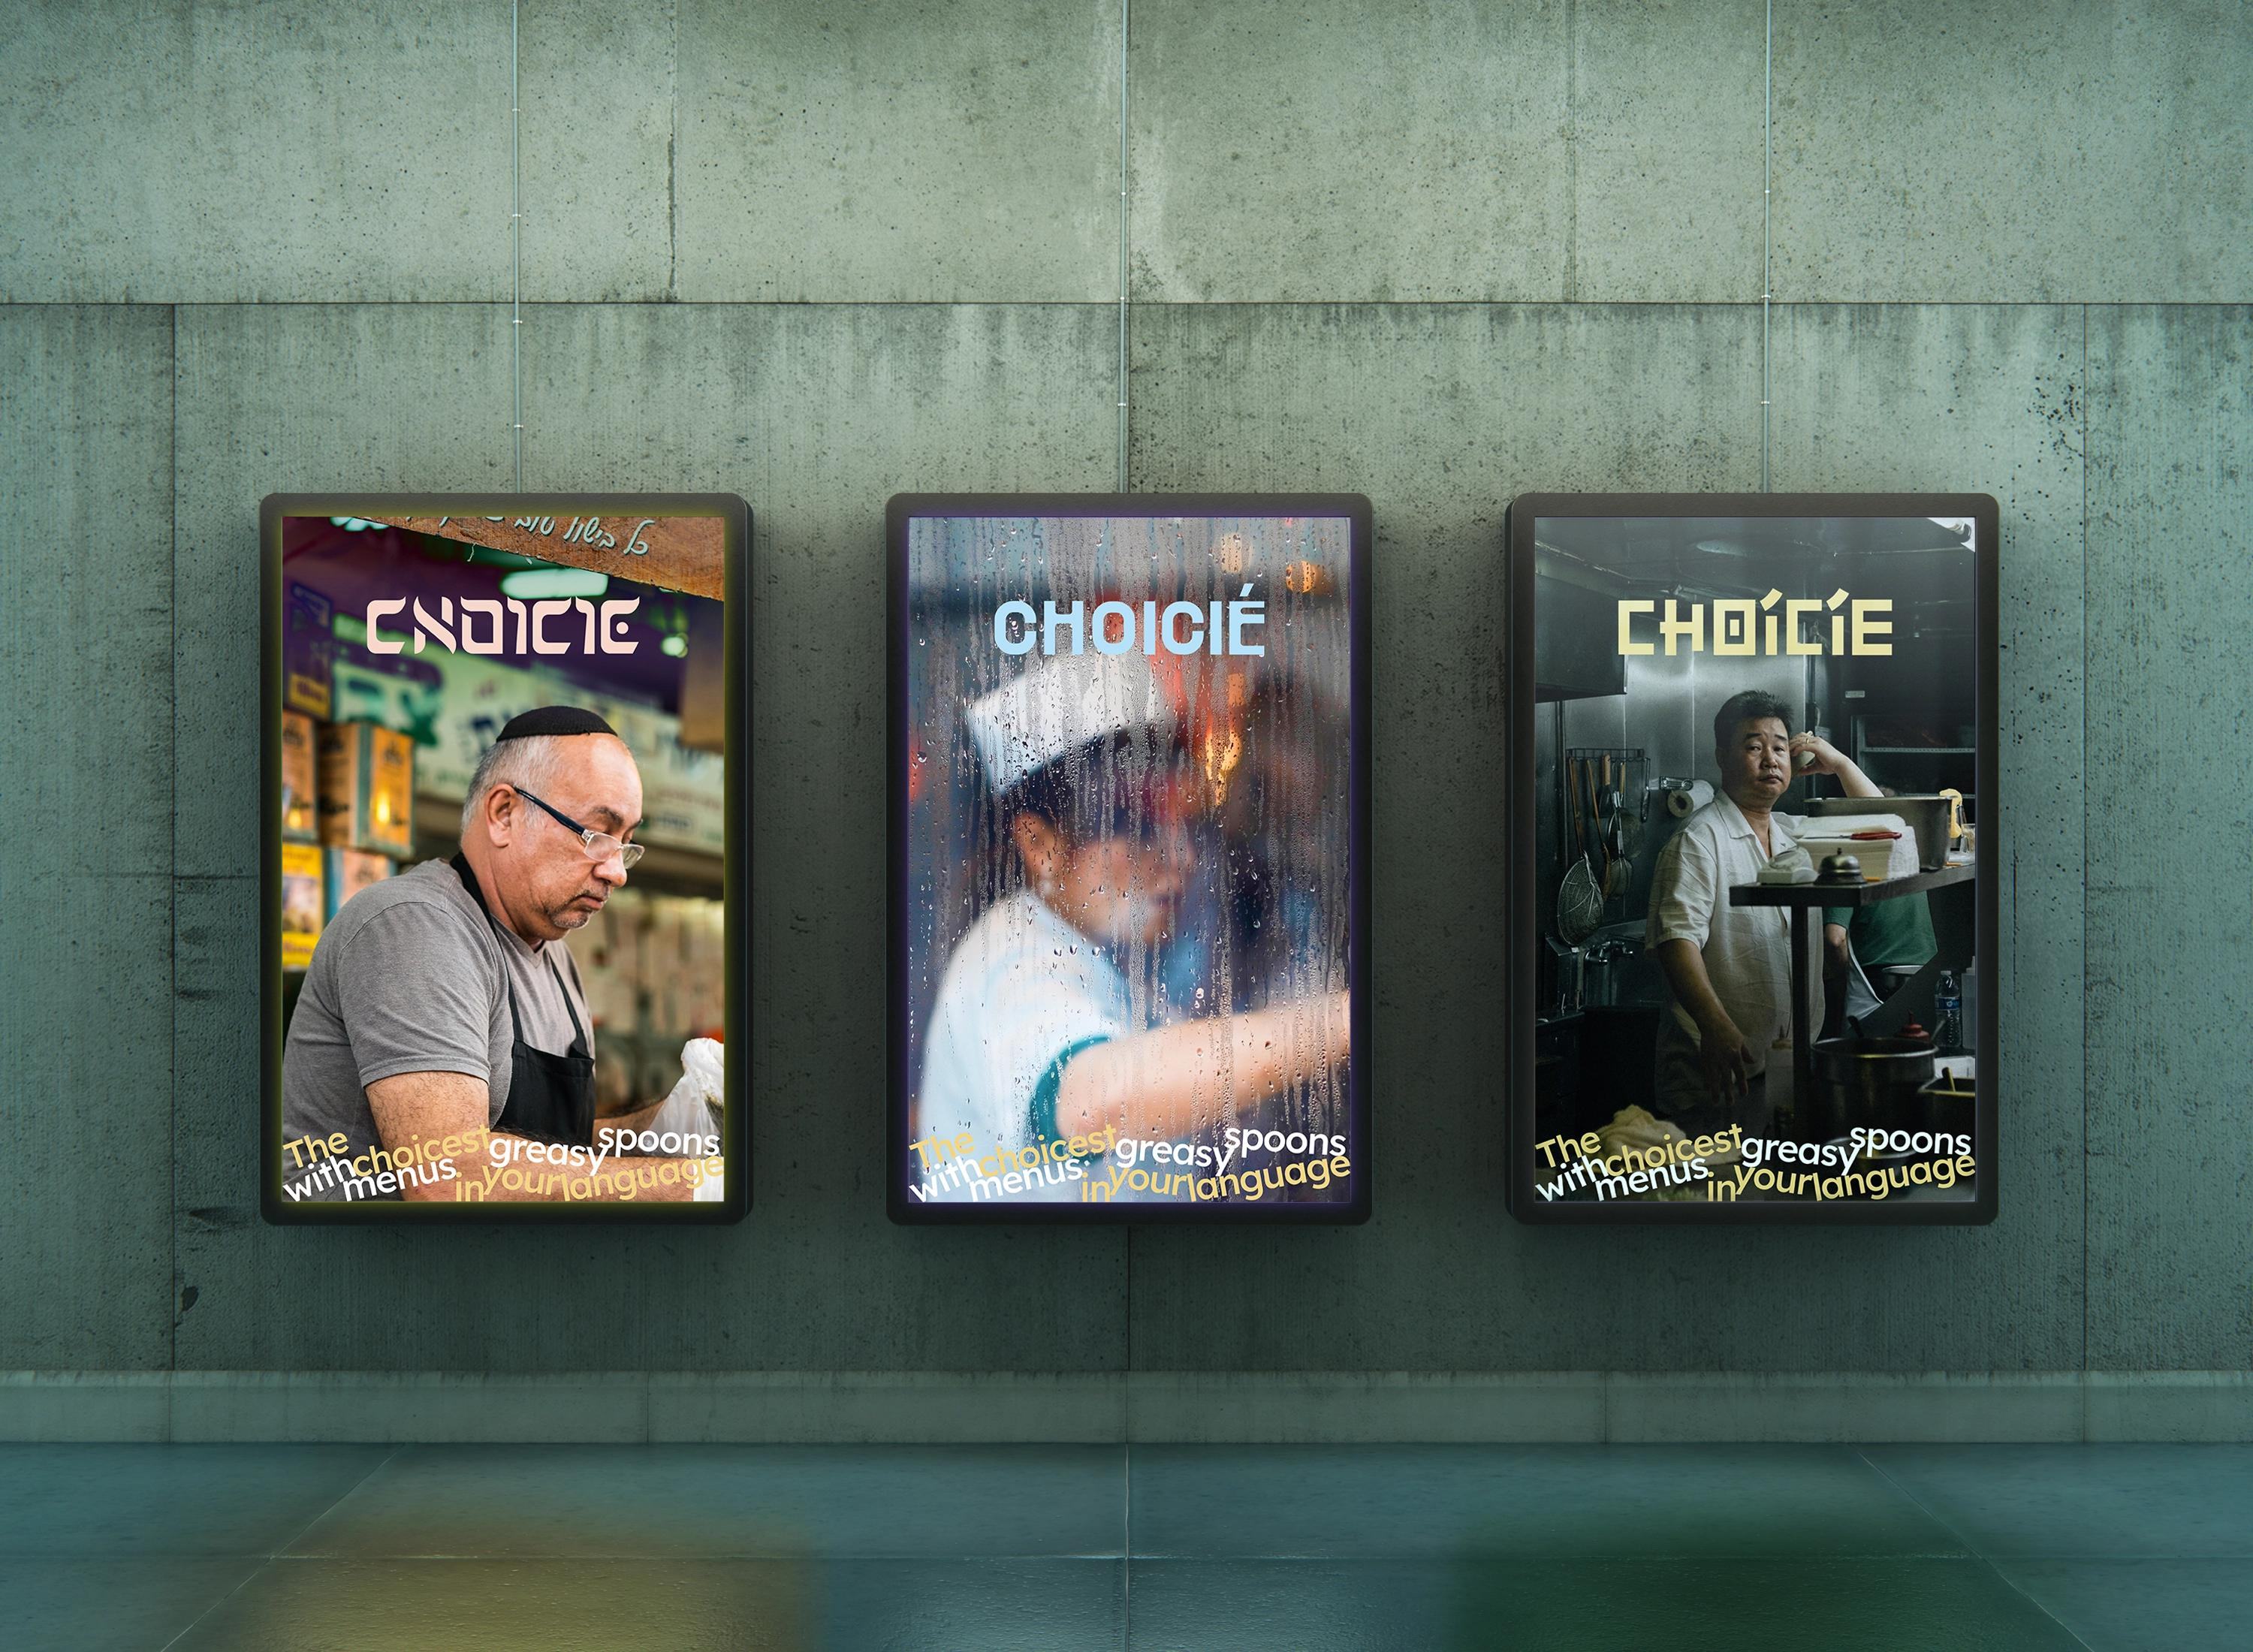 Choicie Food App Subway Posters